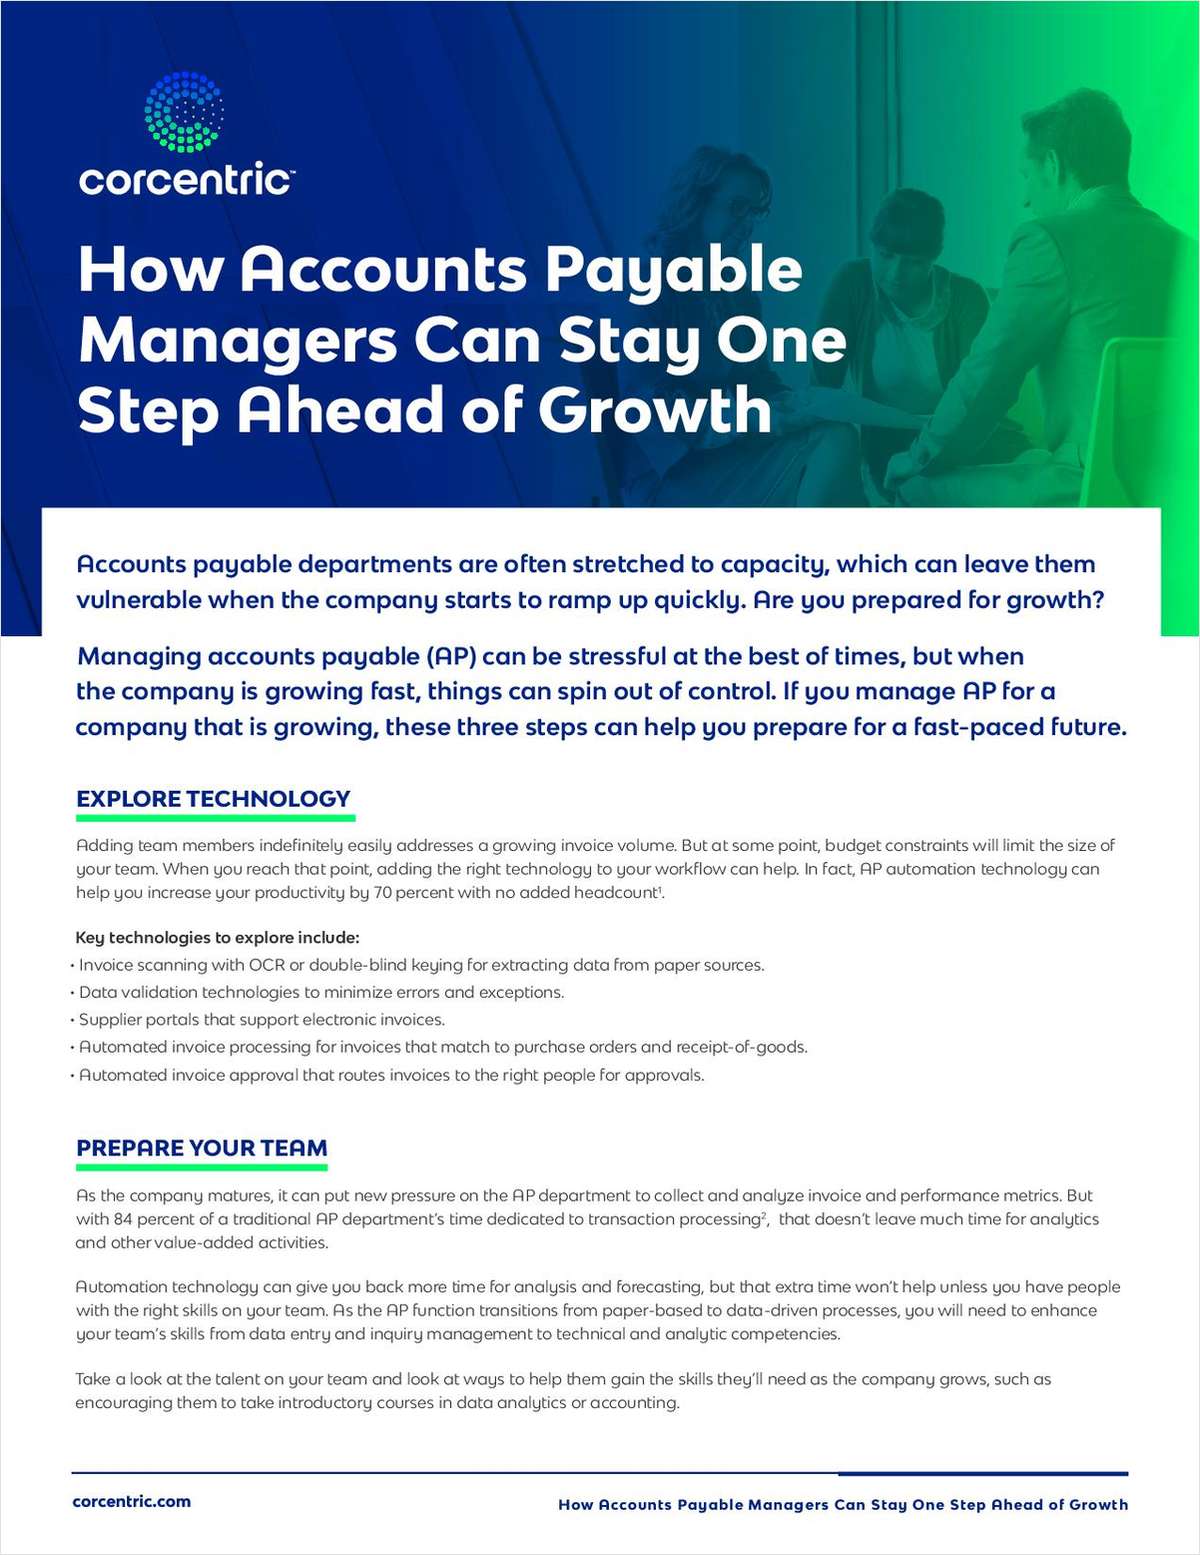 How Accounts Payable Managers Can Stay One Step Ahead of Growth